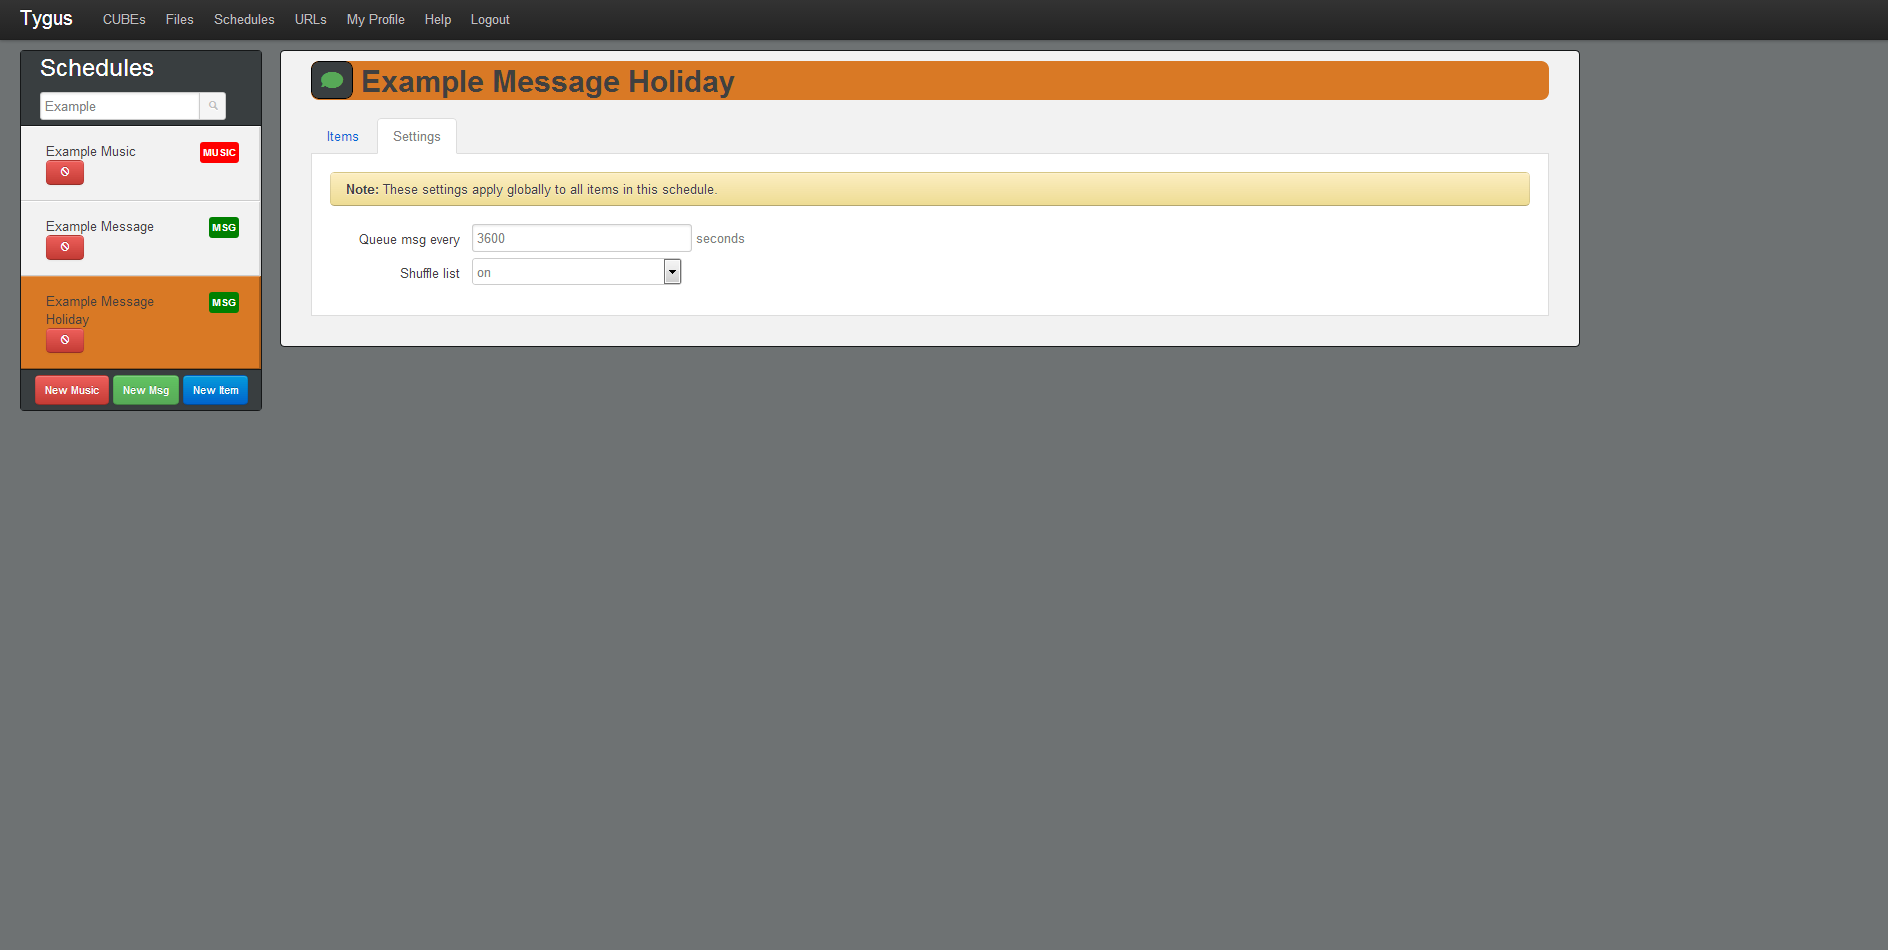 ../_images/Example-7-Holiday_Messages_Settings.png